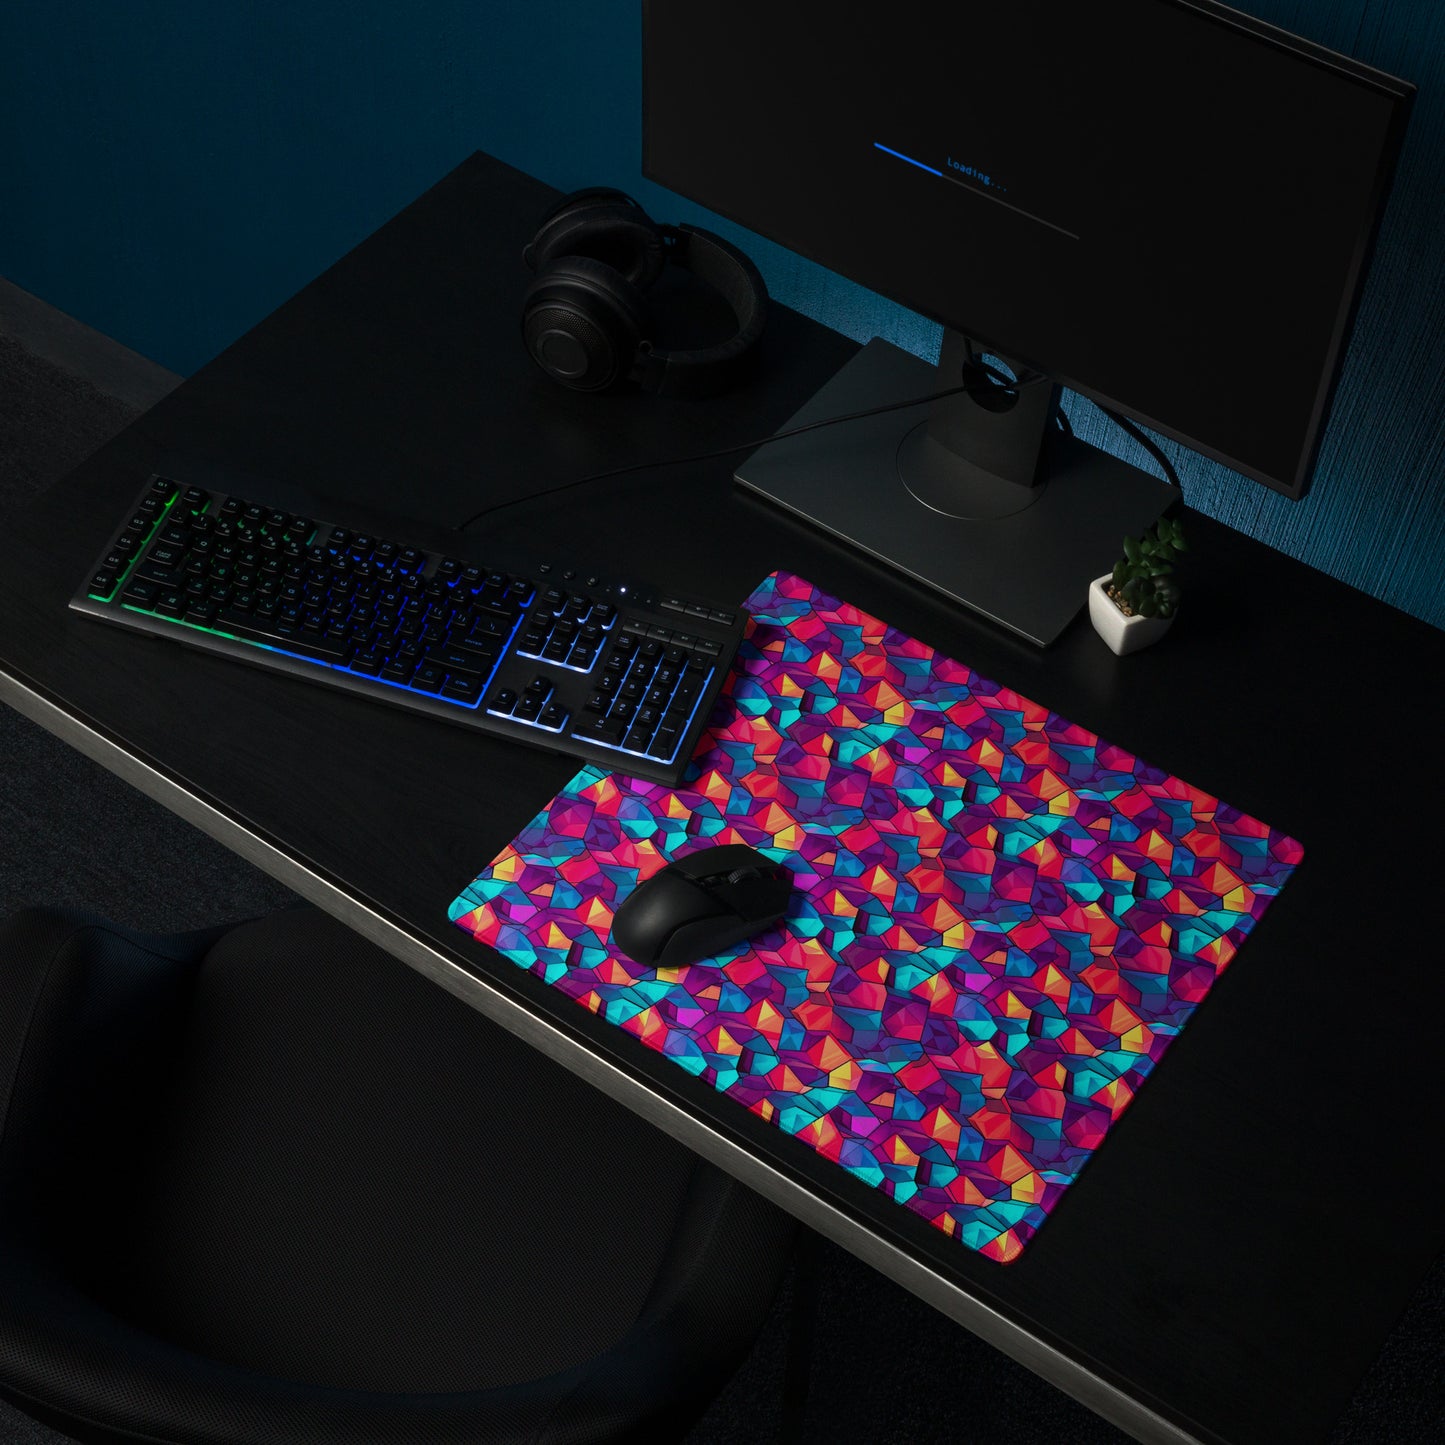 An 18" x 16" gaming desk pad with red, blue, and purple crystals. It sits on a black desk with a keyboard, monitor, and mouse.